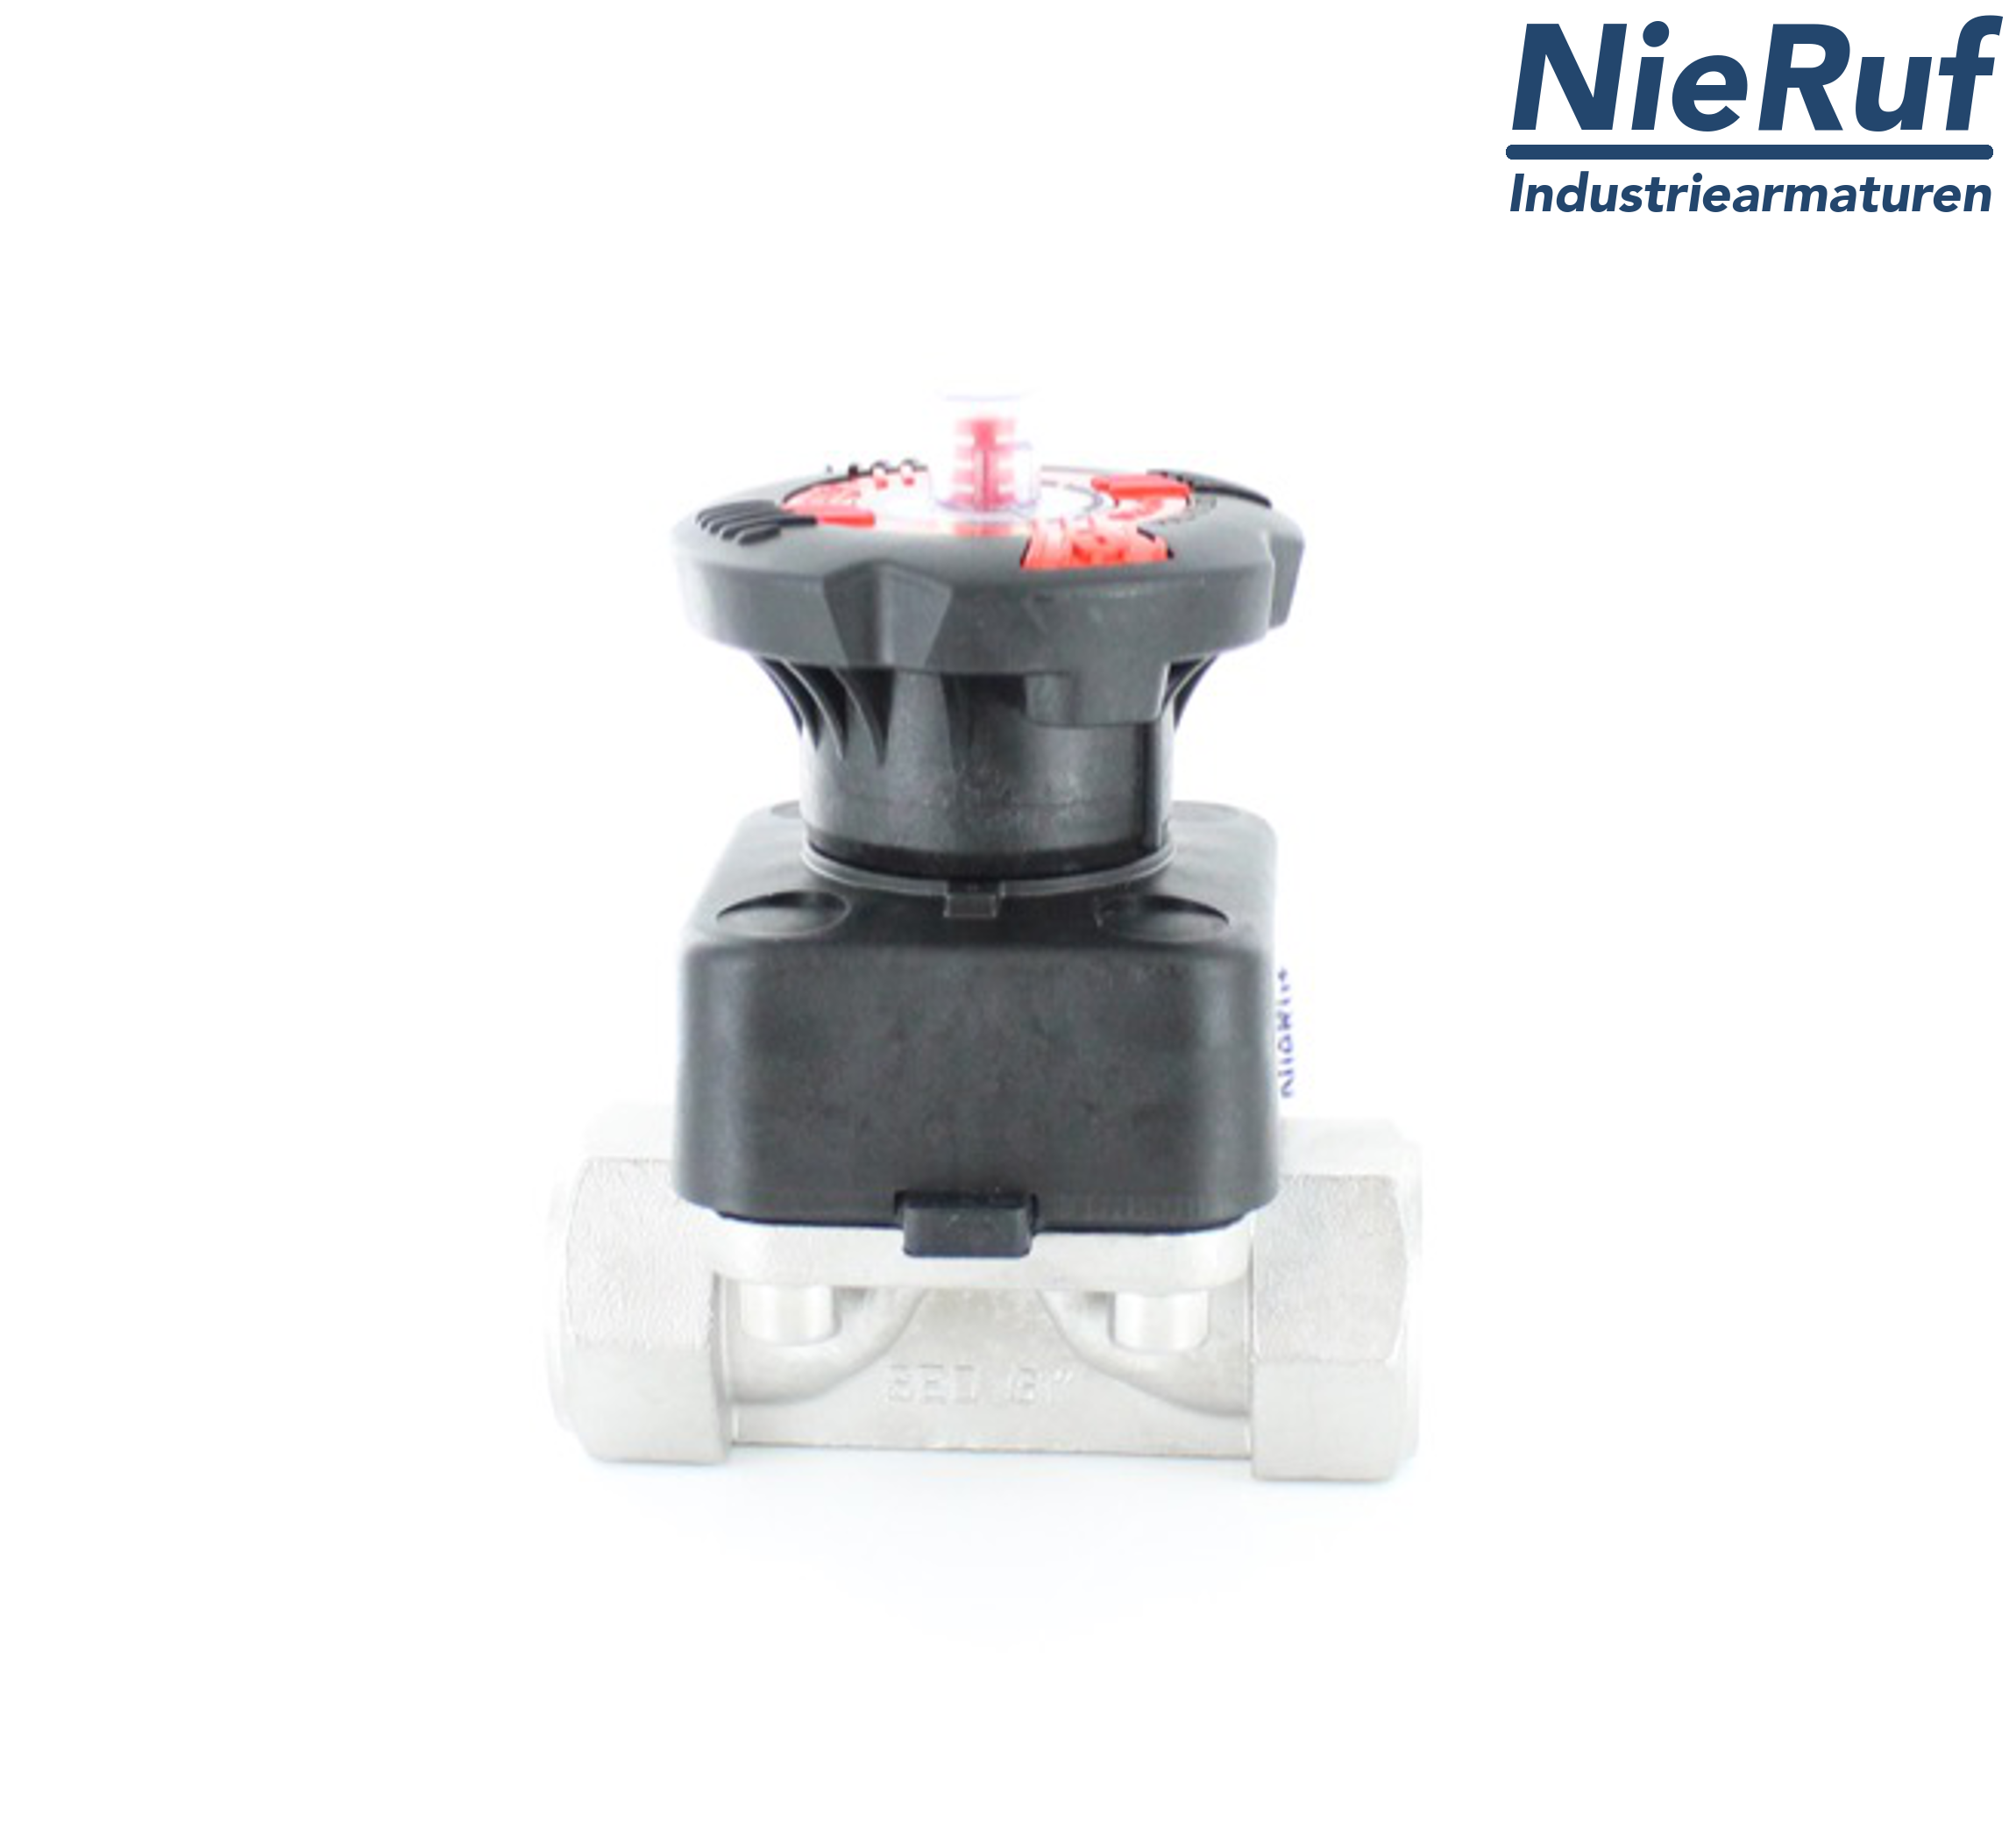 stainless steel-diaphragm valve 1 1/2 Inch membrane PTFE/EPDM two-piece female thread BSP